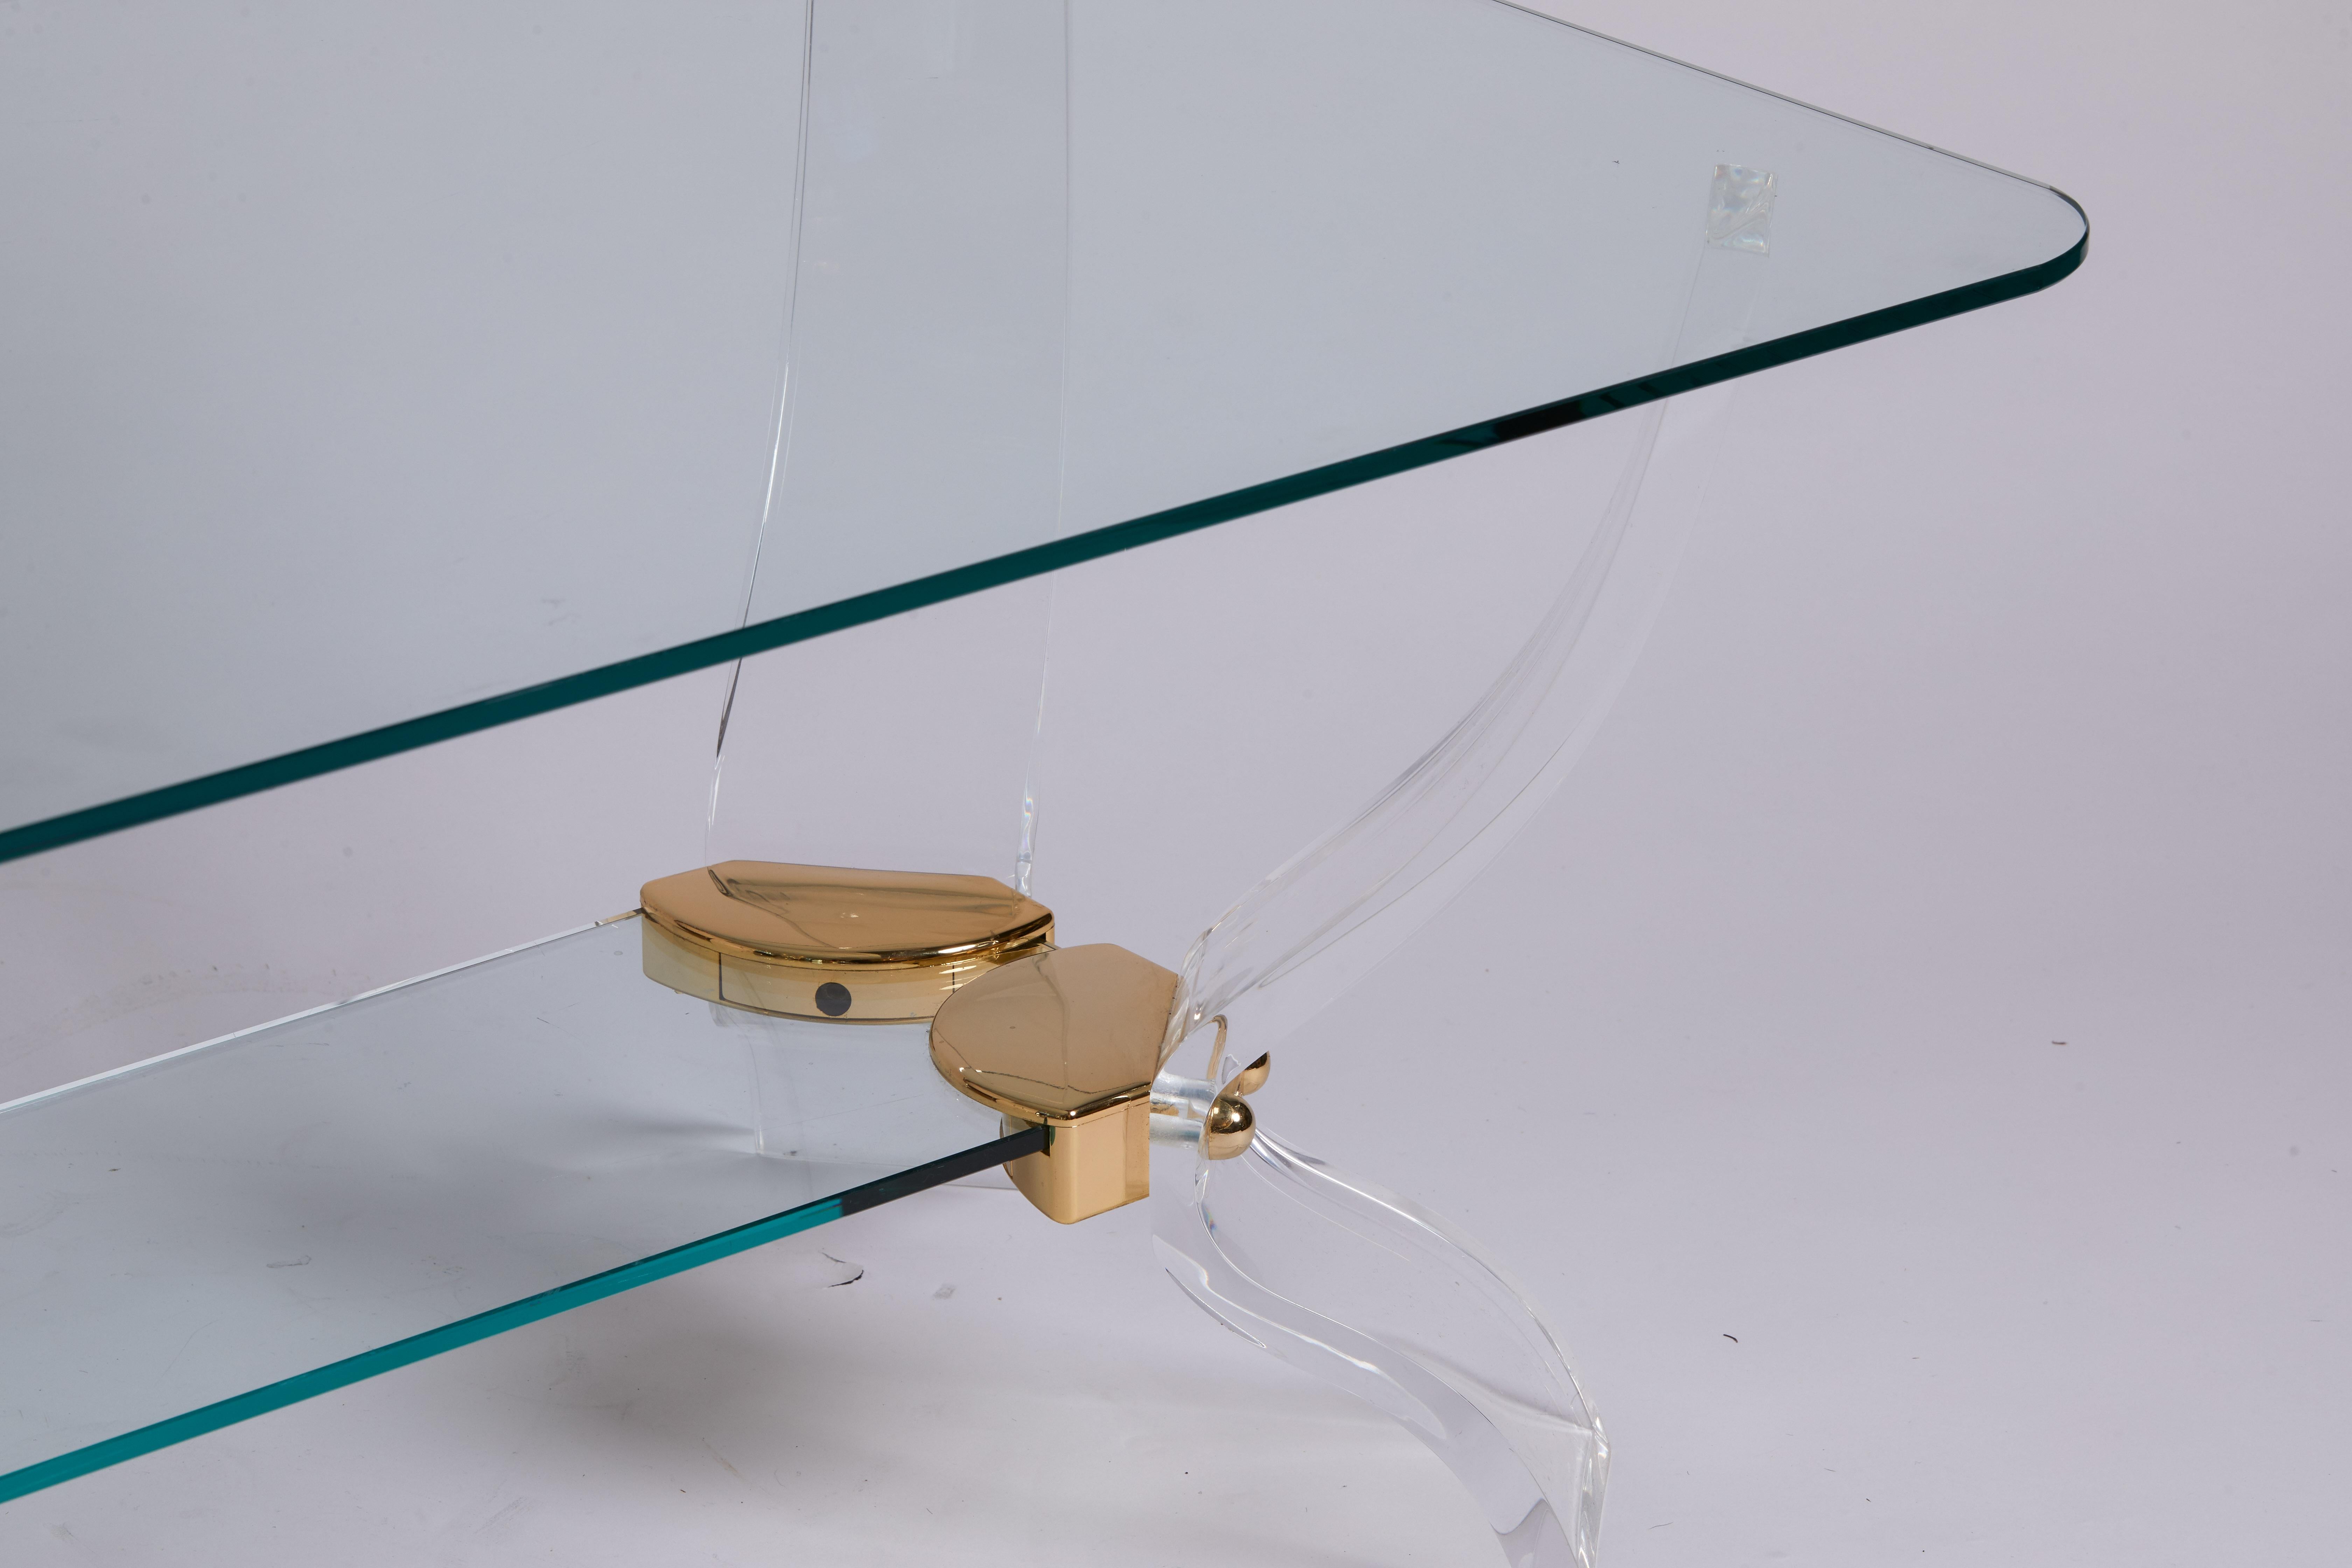 1980s Italian cocktail table made of Lucite legs, glass central portion, and brass accents.